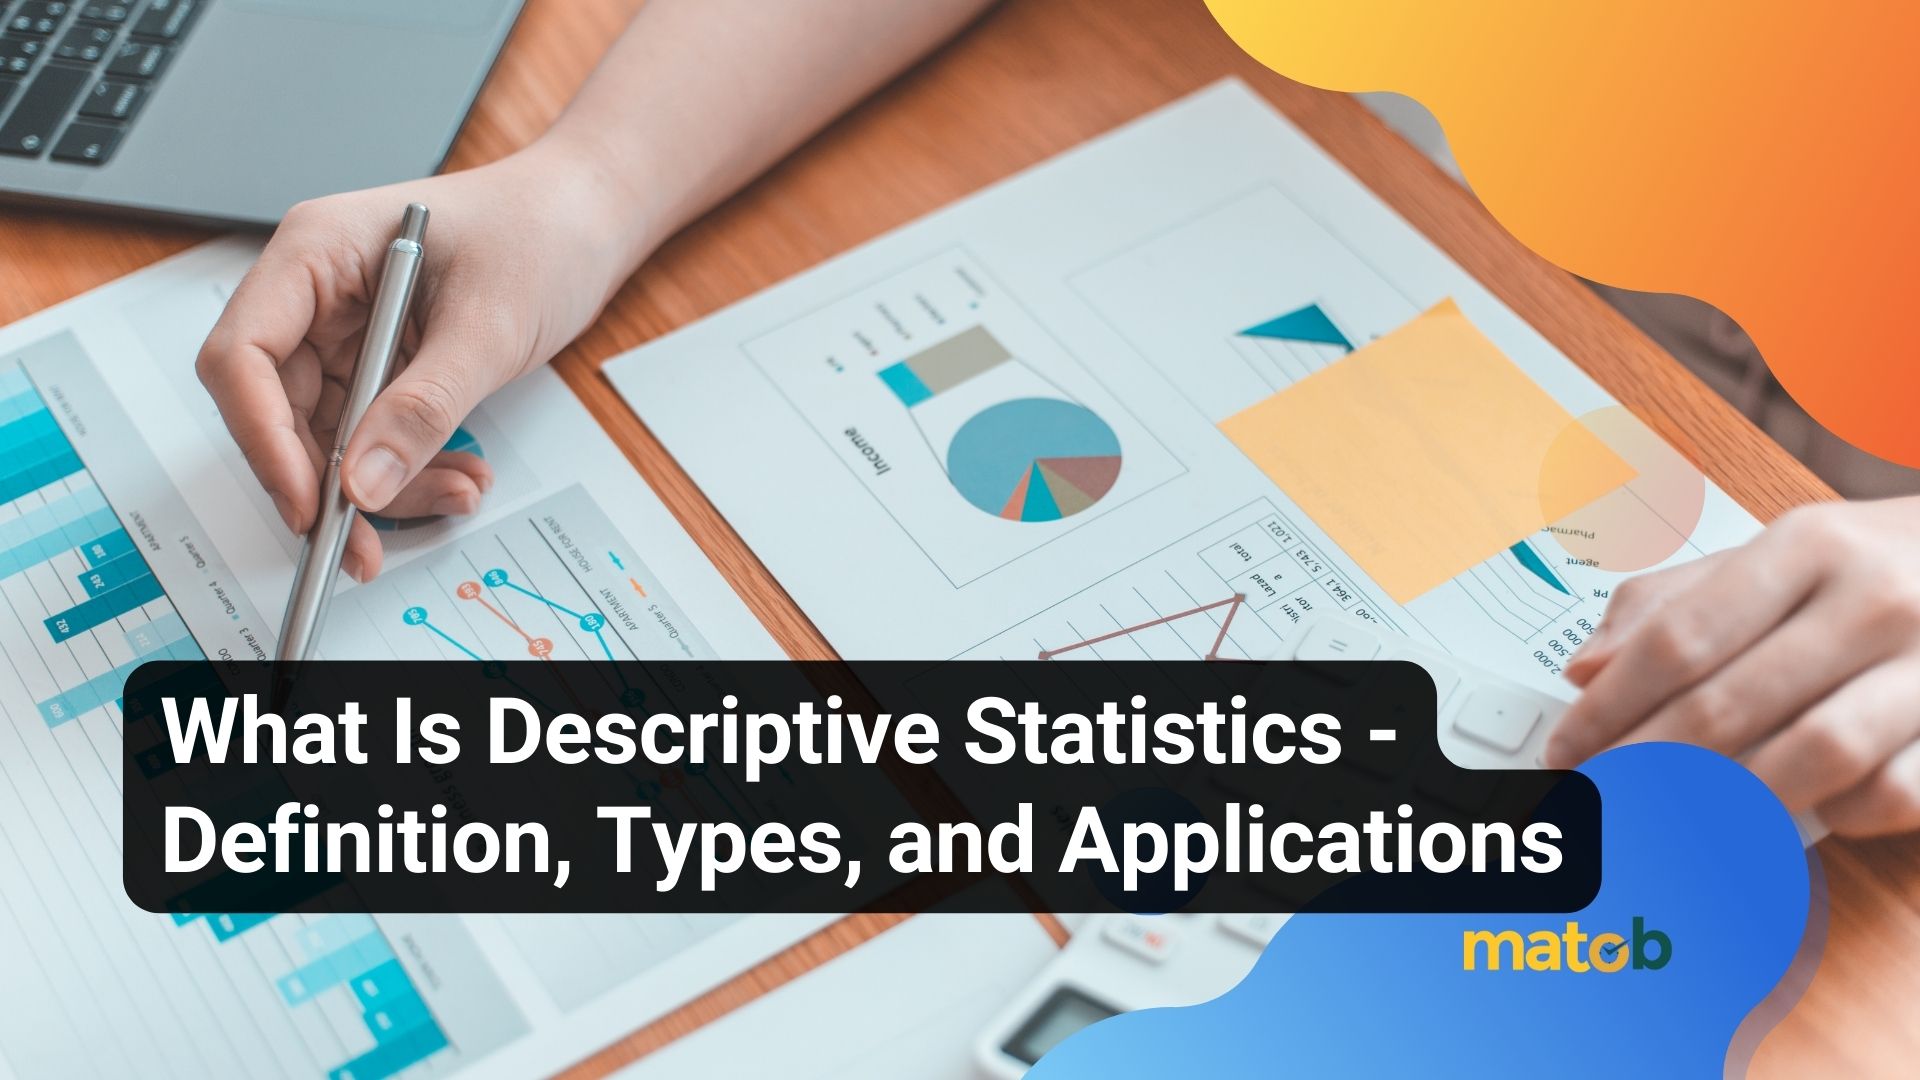 What Is Descriptive Statistics - Definition, Types, and Applications